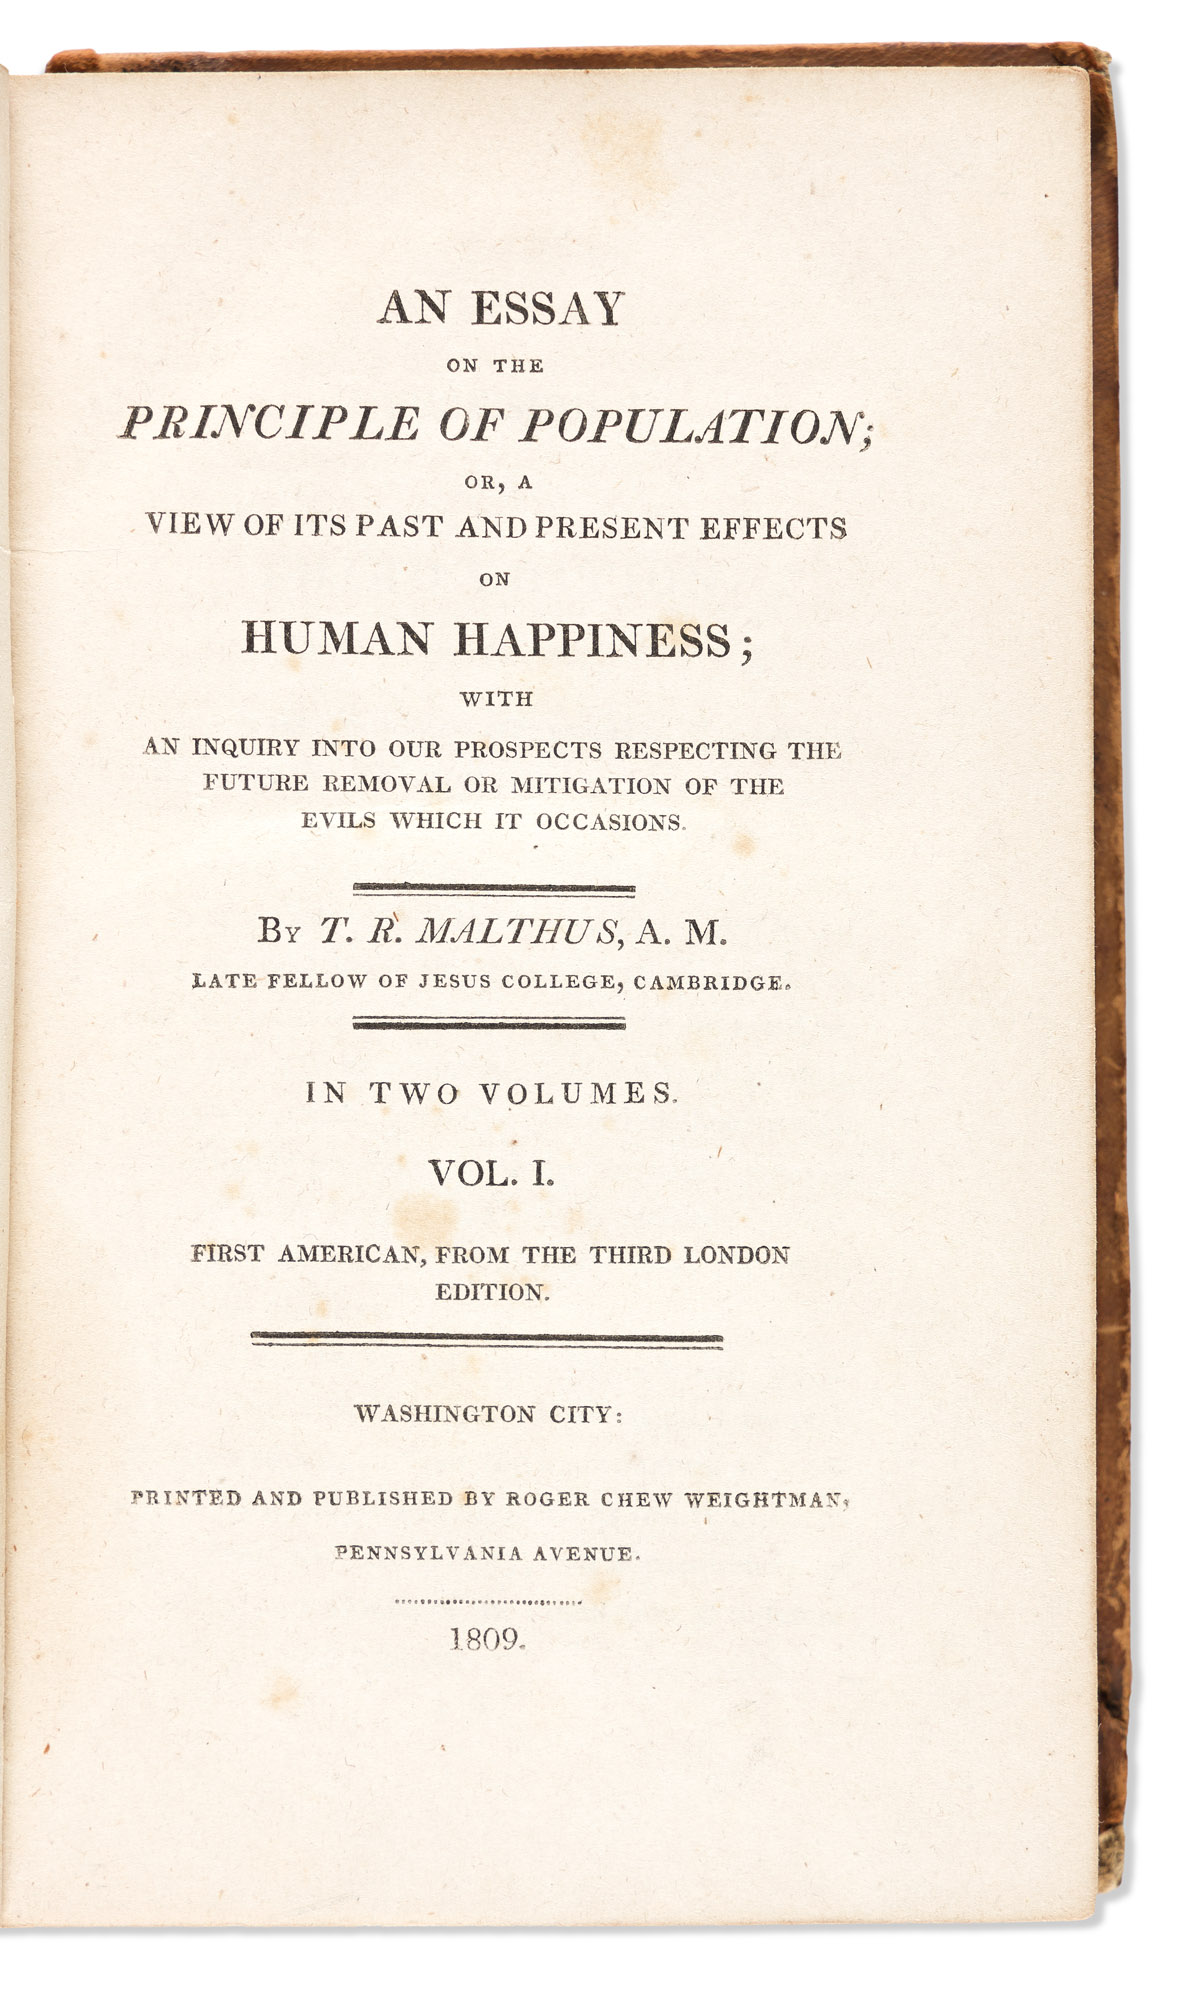 [Economics] Malthus, Thomas Robert (1766-1834) An Essay on the Principle of Population or a View of its Past and Present Effects on Hum